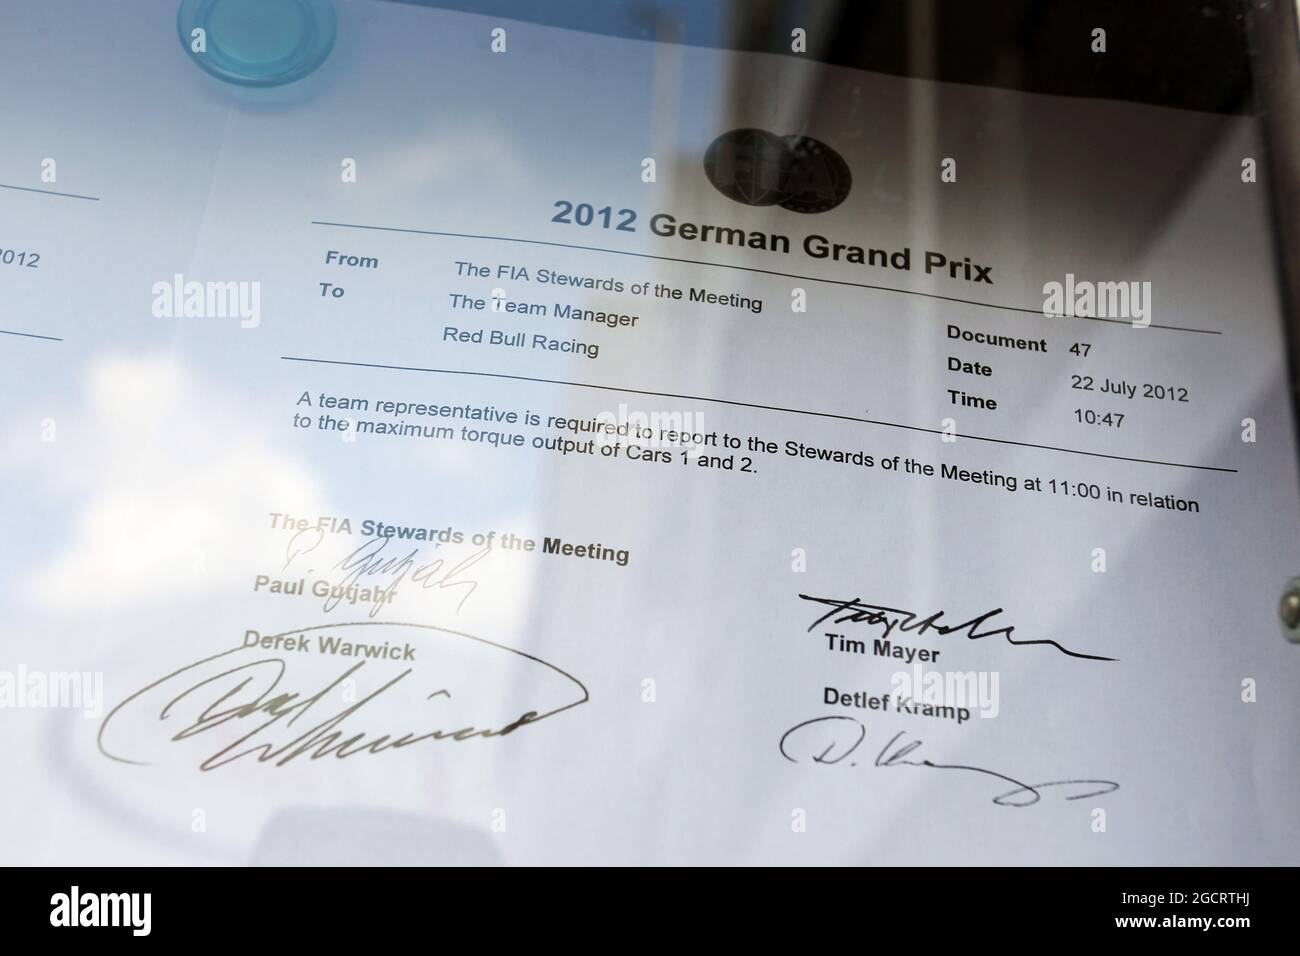 An FIA Memo requesting a meeting with Red Bull Racing representative in relation to the maximum torque output of the cars. German Grand Prix, Sunday 22nd July 2012. Hockenheim, Germany. Stock Photo